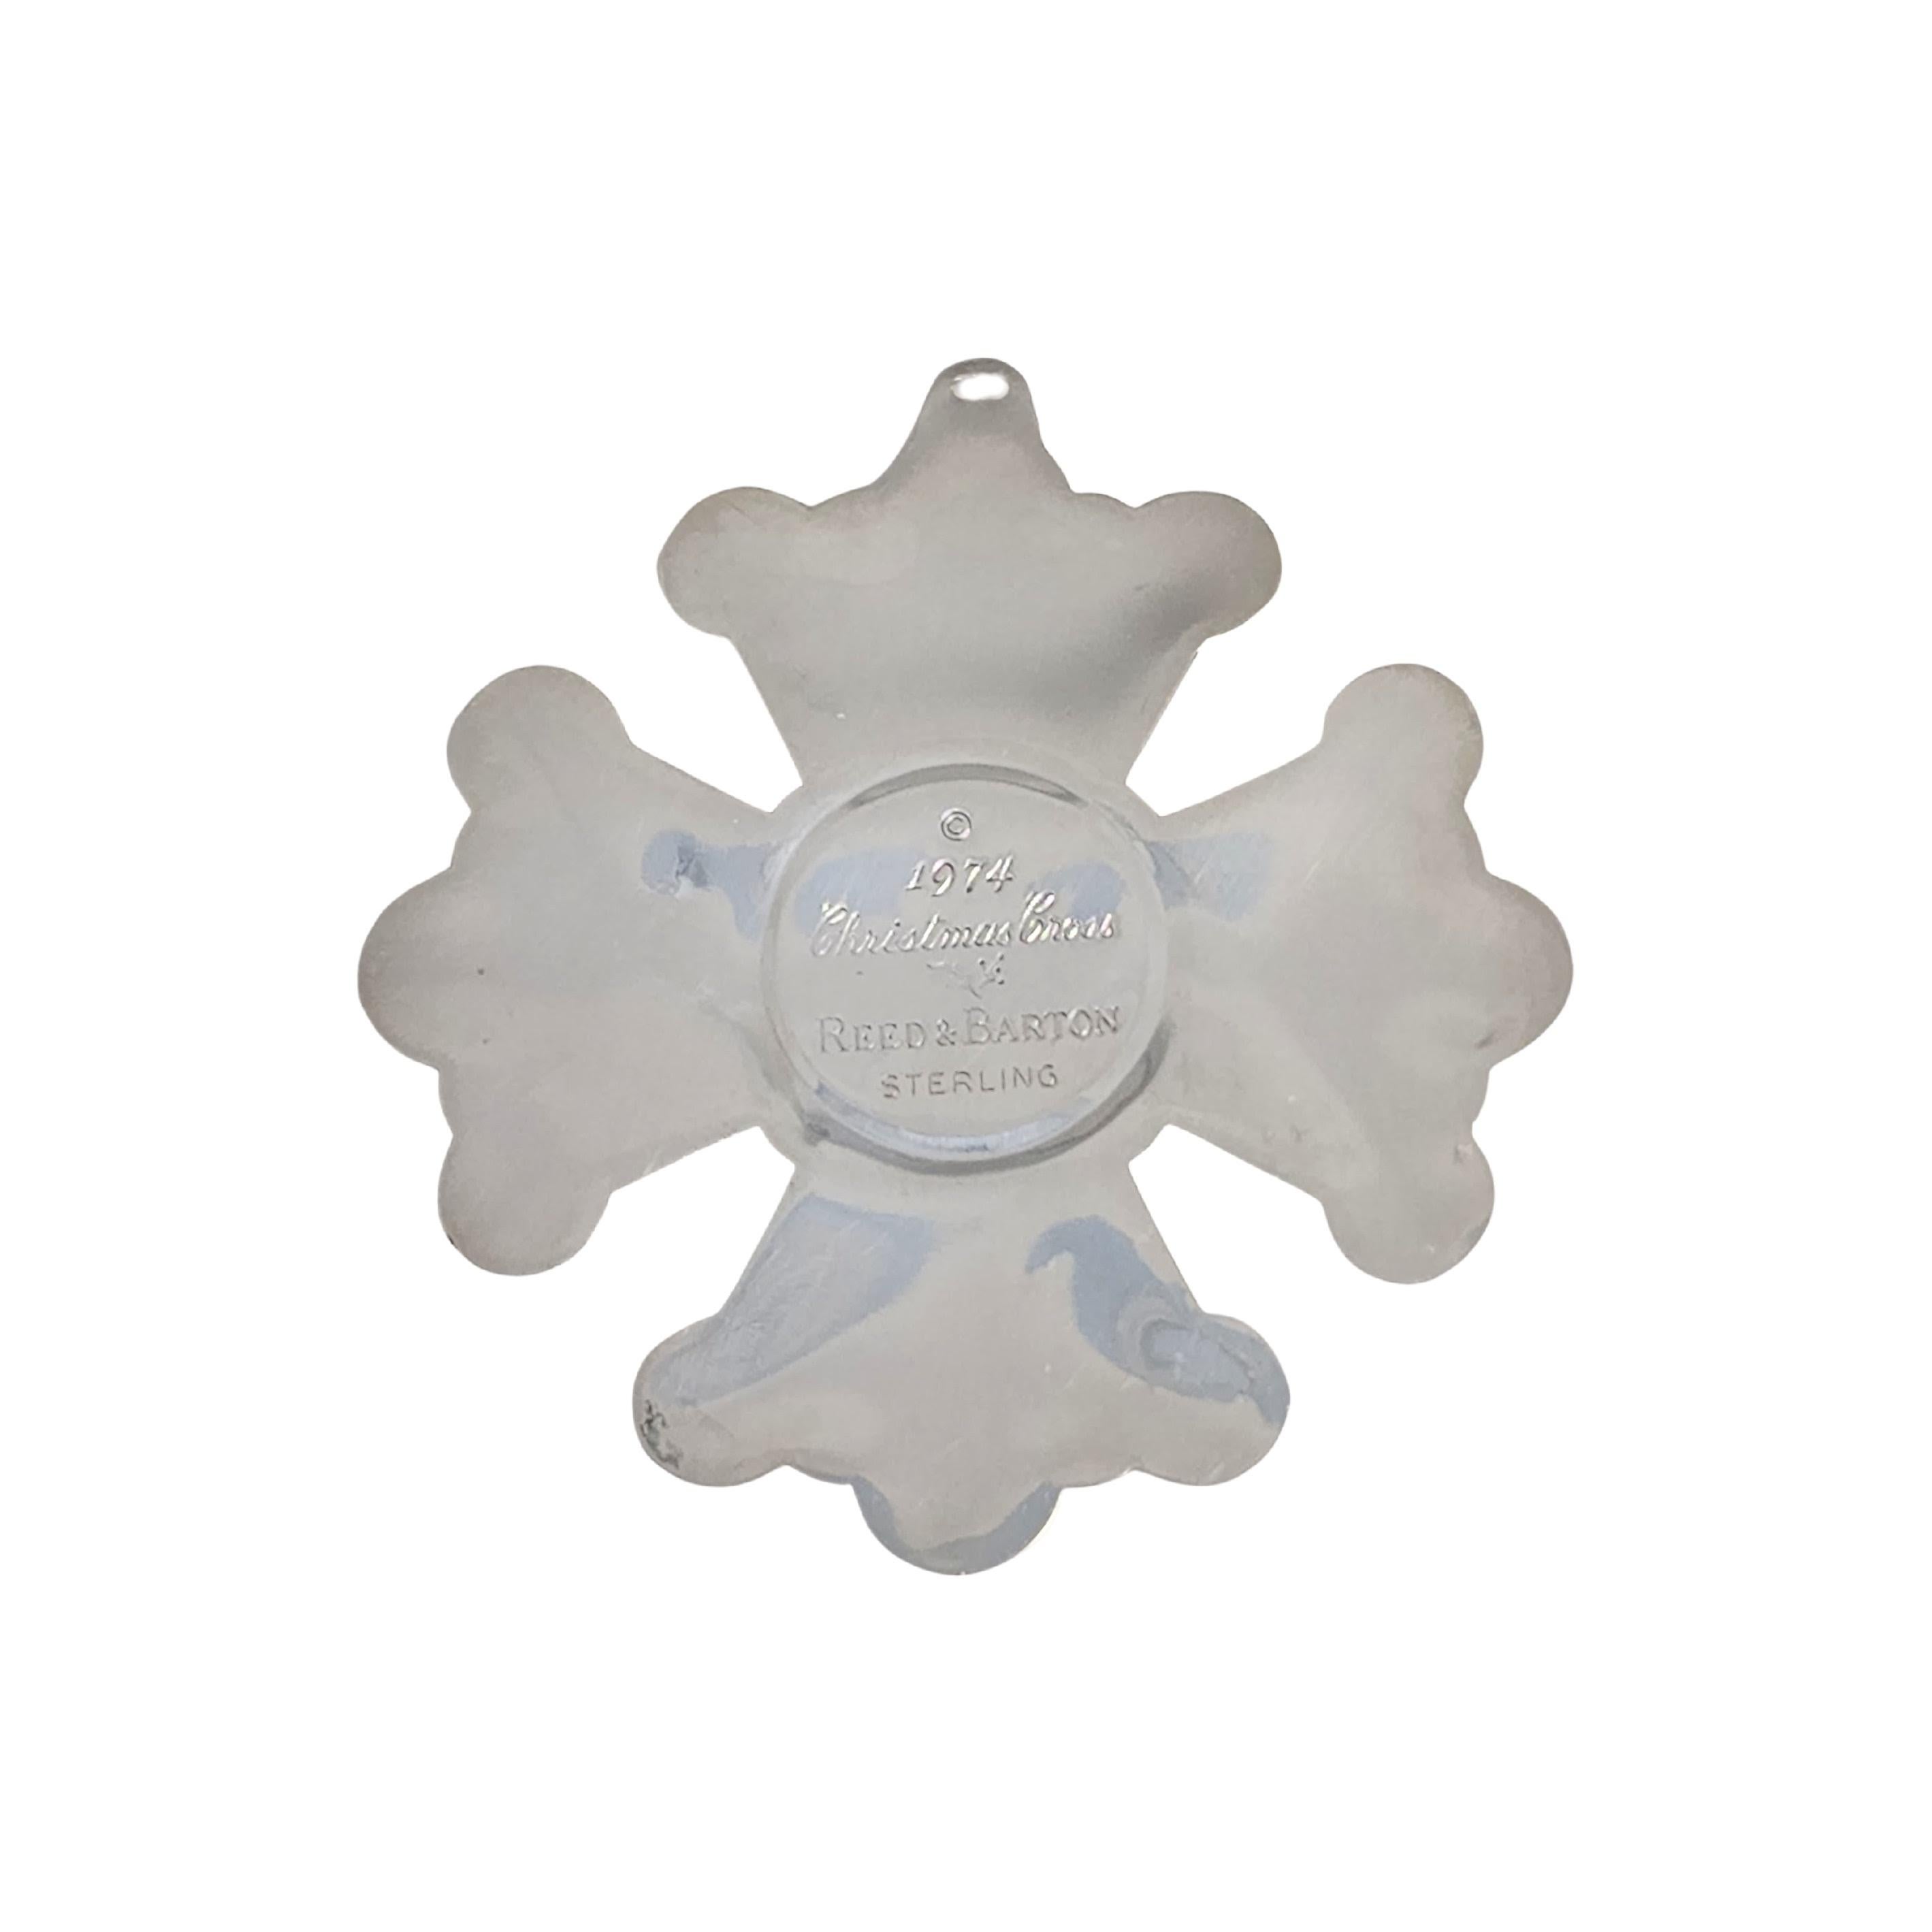 Sterling silver Christmas Cross ornament by Reed & Barton from 1974.

A beautifully detailed cross ornament featuring flower and swirl accents.

Weighs approx 9.7dwt, 15.1g

Measures approx 3 1/8